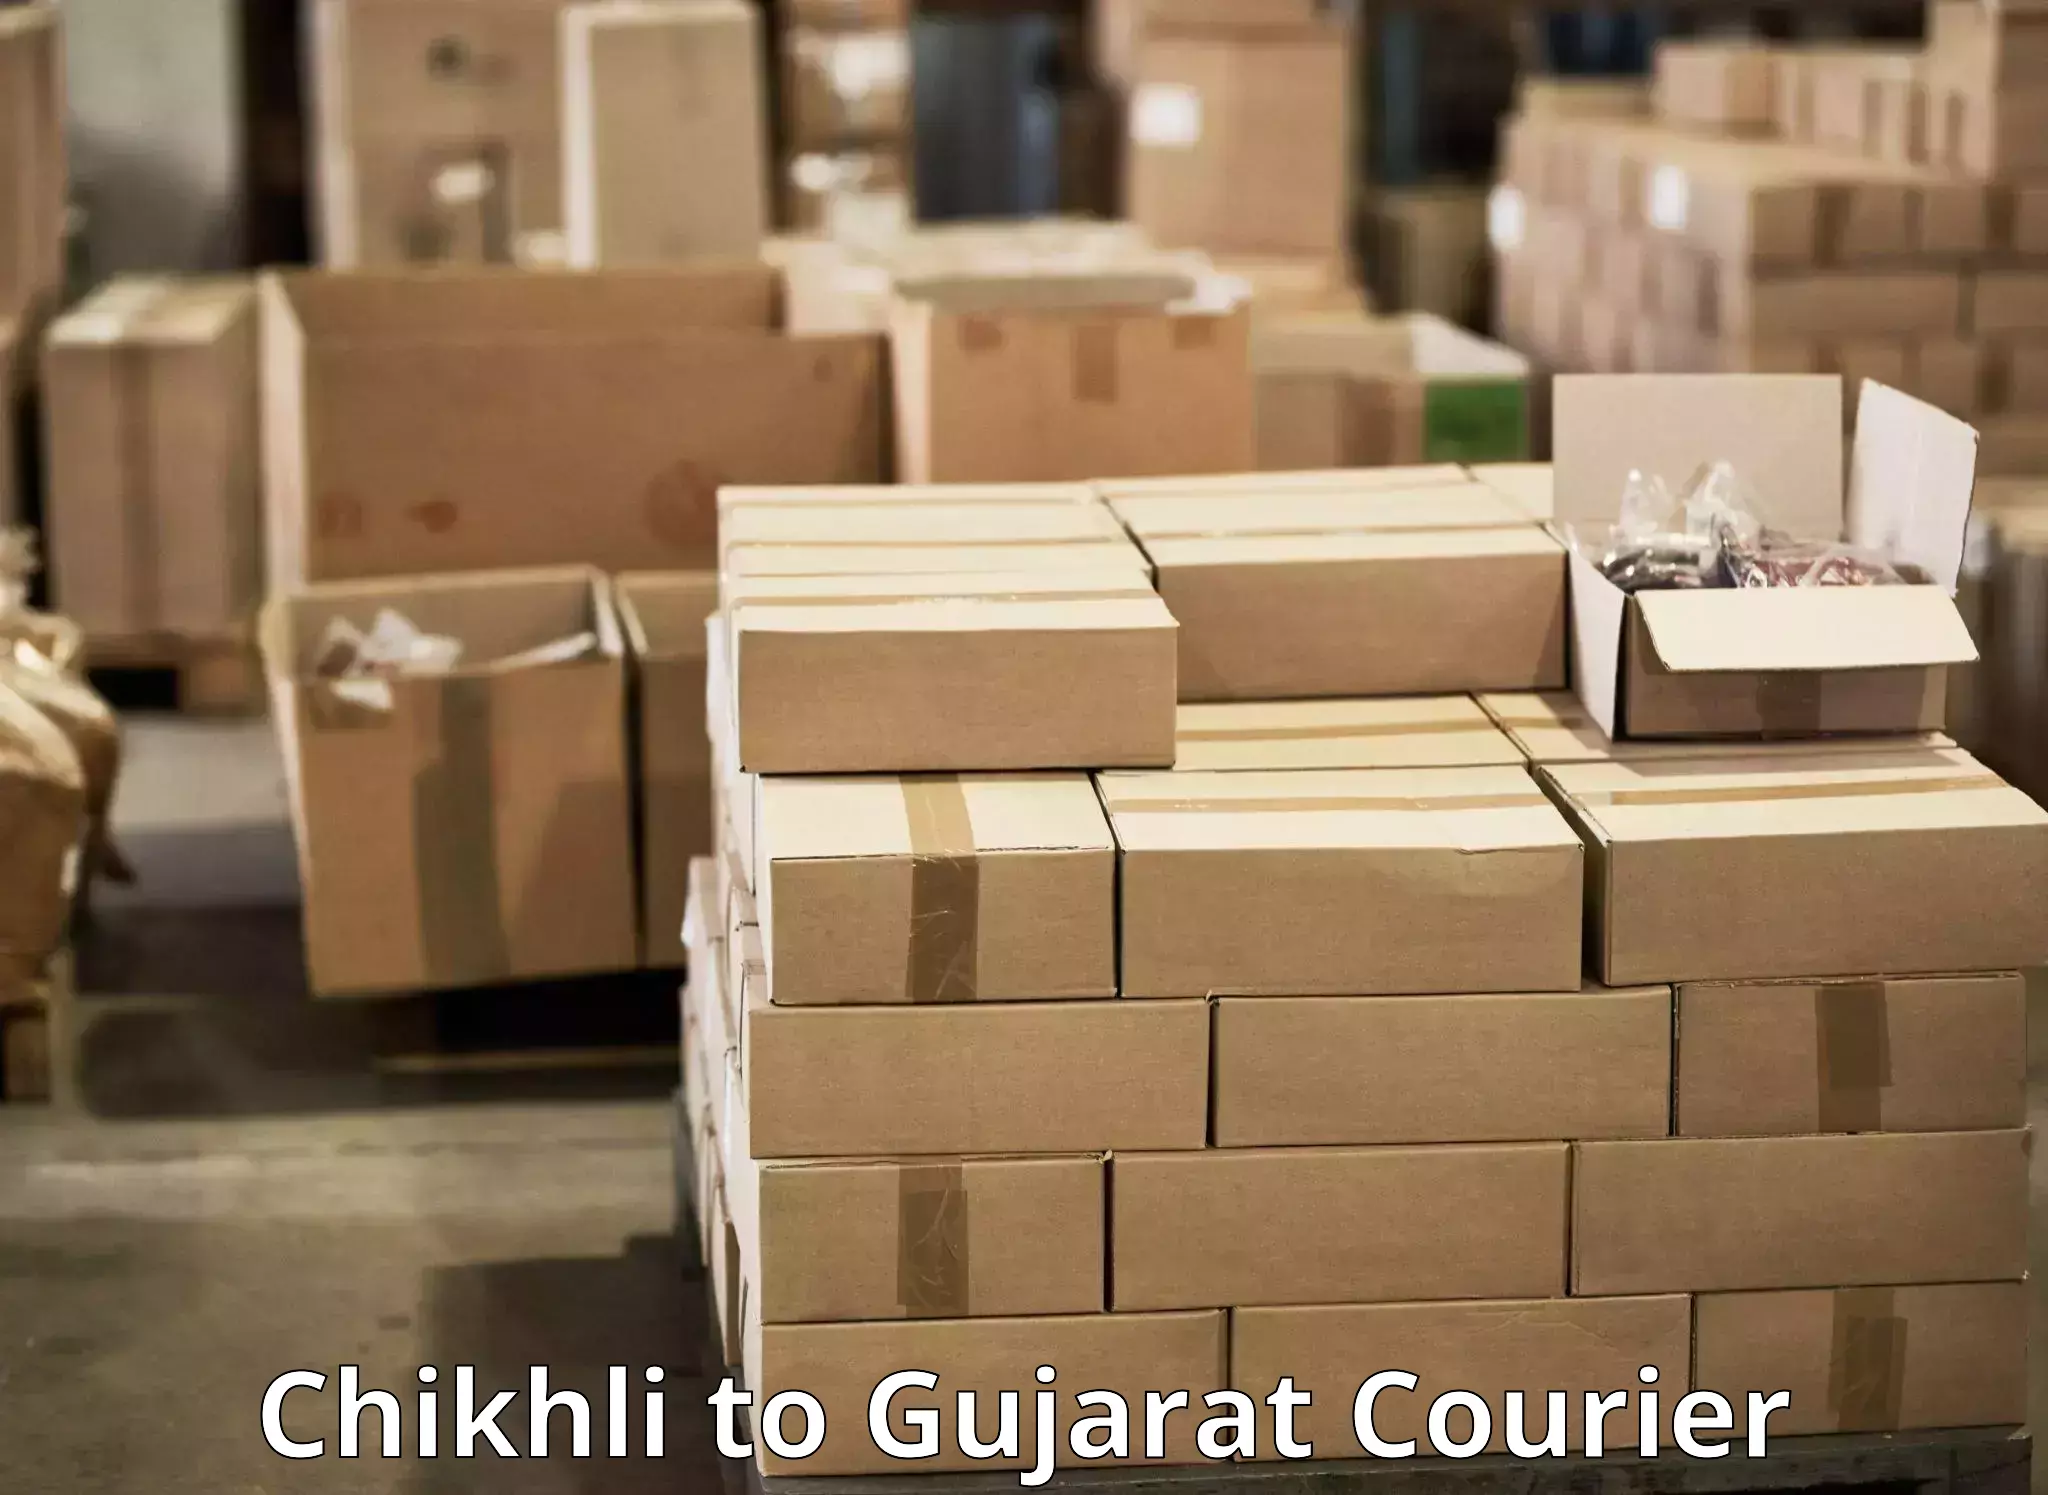 State-of-the-art courier technology Chikhli to Anand Agricultural University